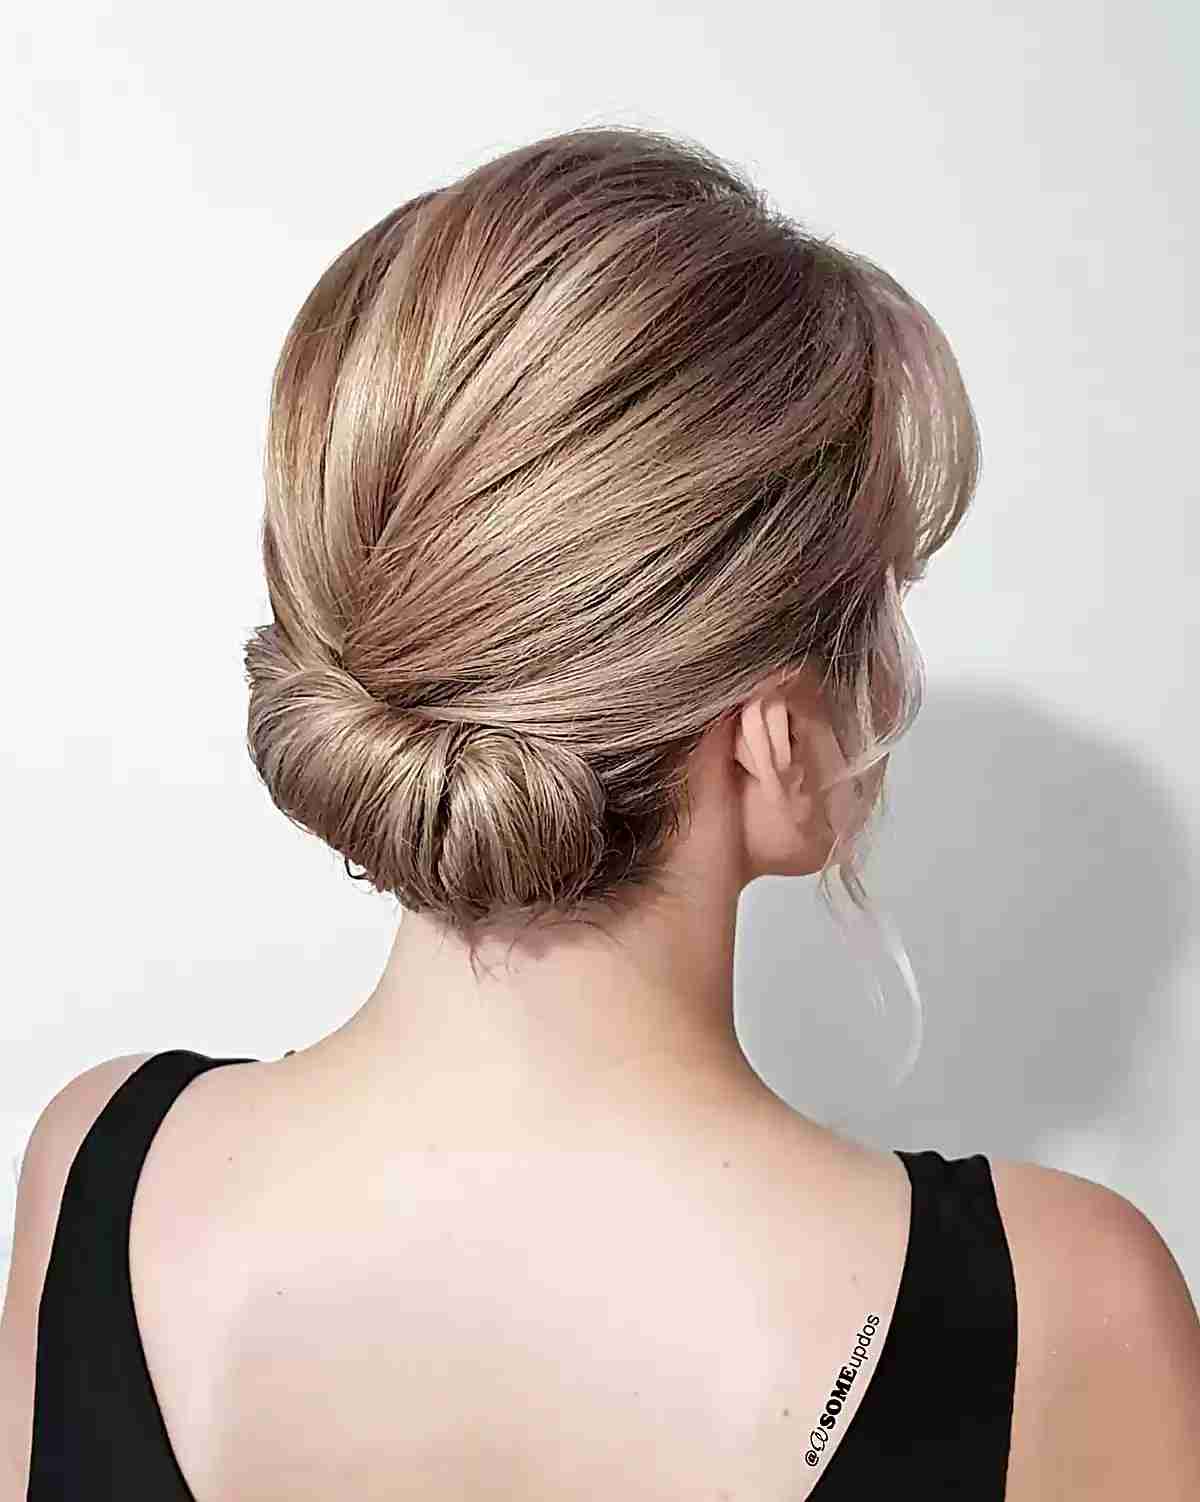 44 Incredibly Chic Updo Ideas for Short Hair